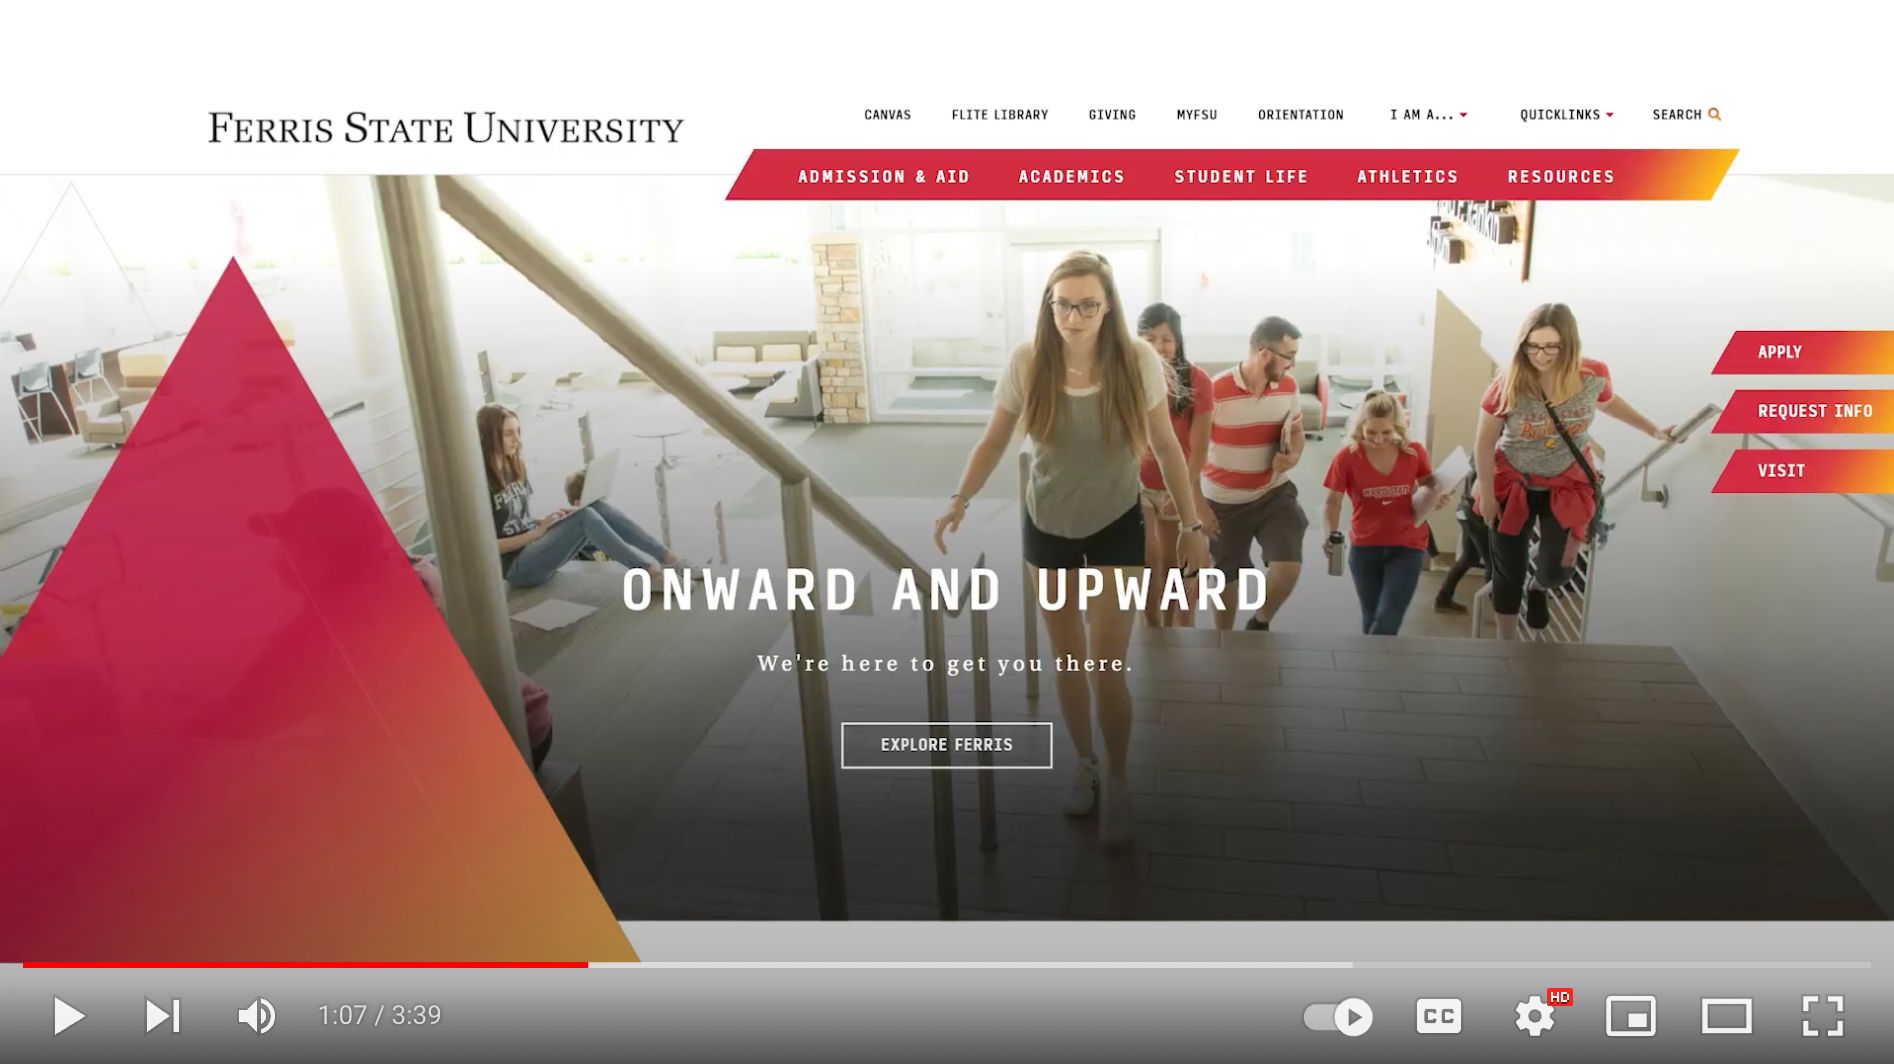 preview of Ferris State's website as shown in the youtube video